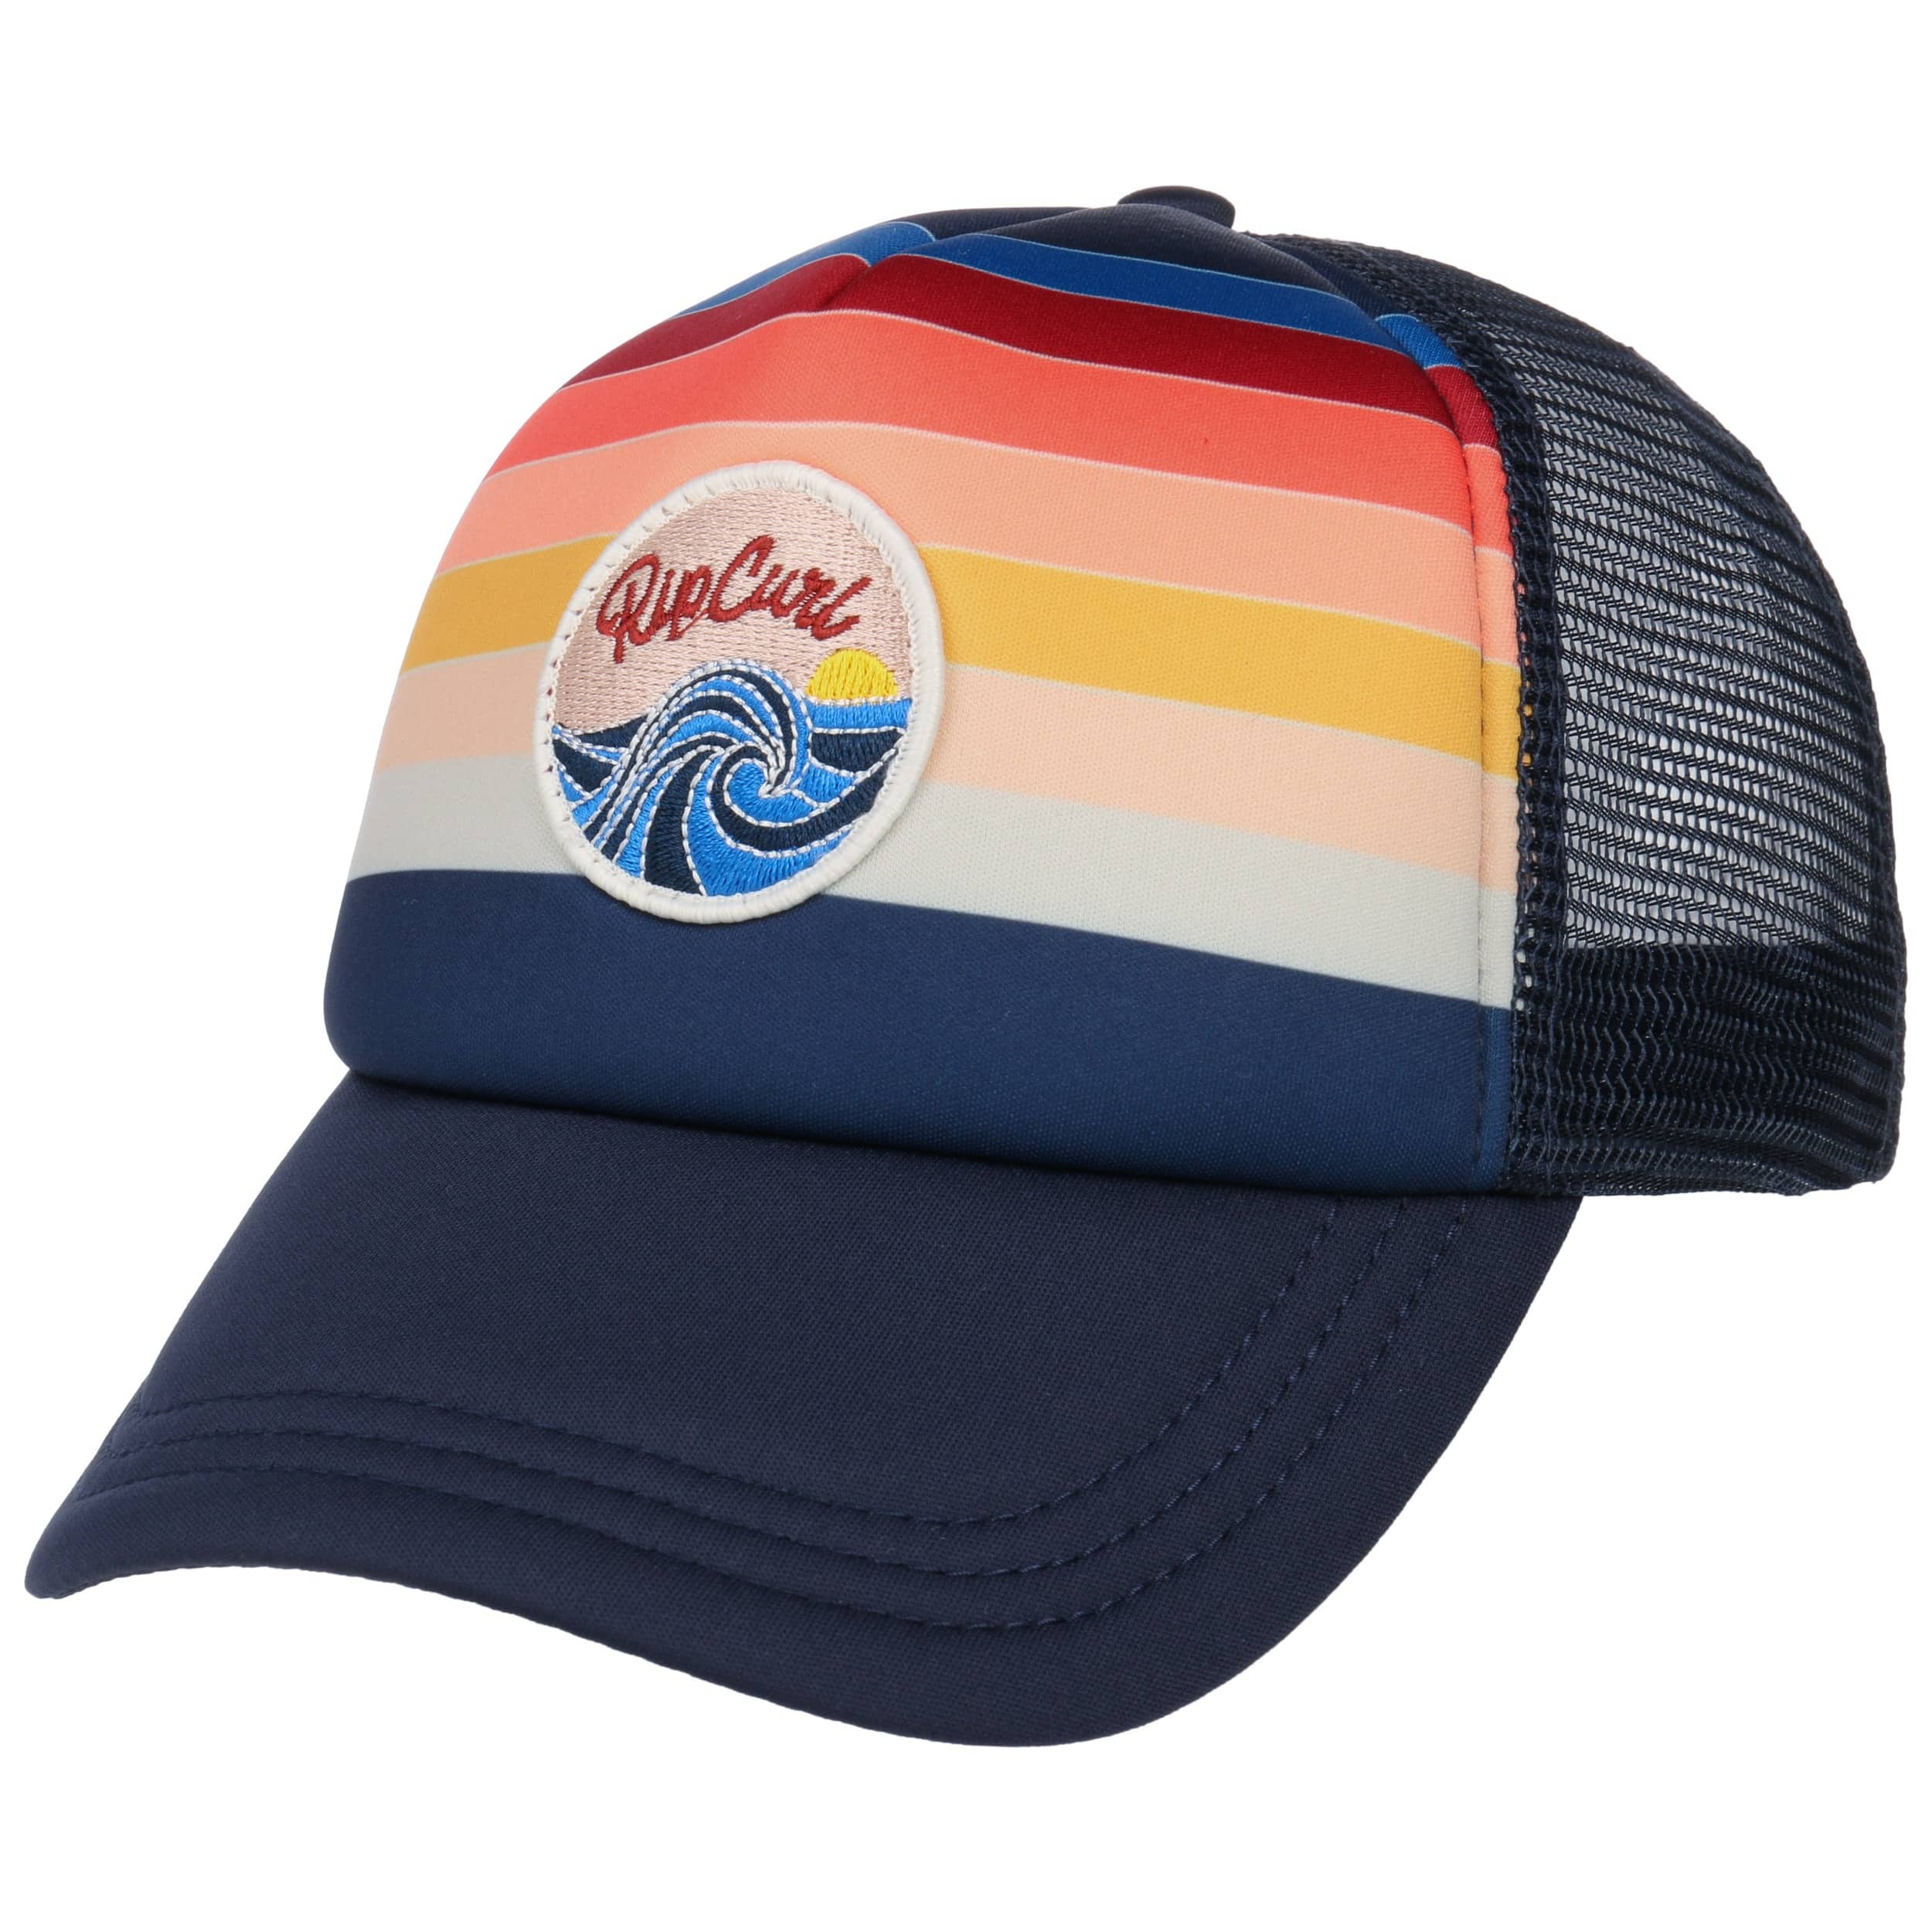 Keep On Surfin Trucker Cap By Rip Curl 24 95